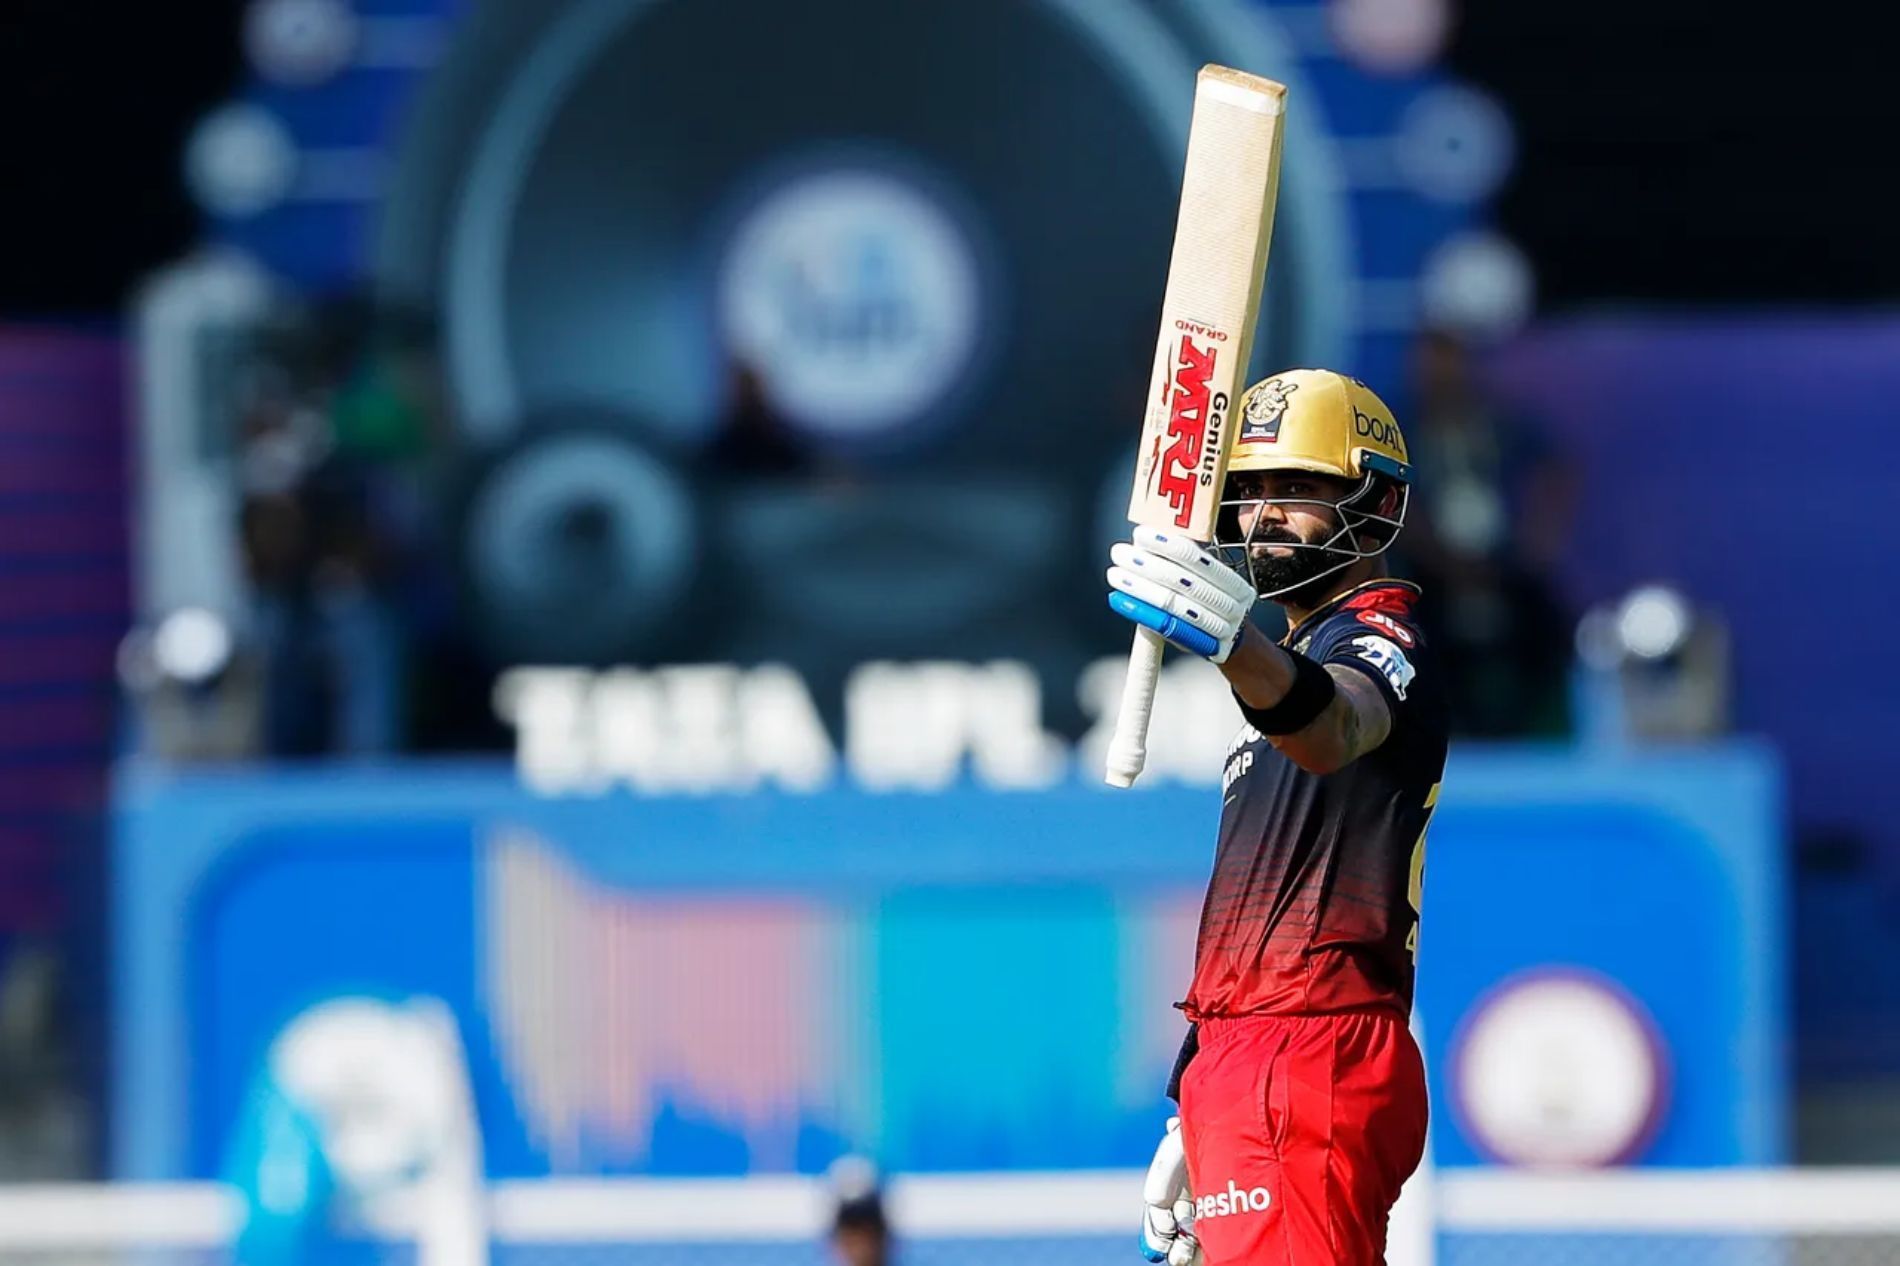 Virat Kohli acknowledges the applause after his fifty against Gujarat. Pic: IPLT20.COM